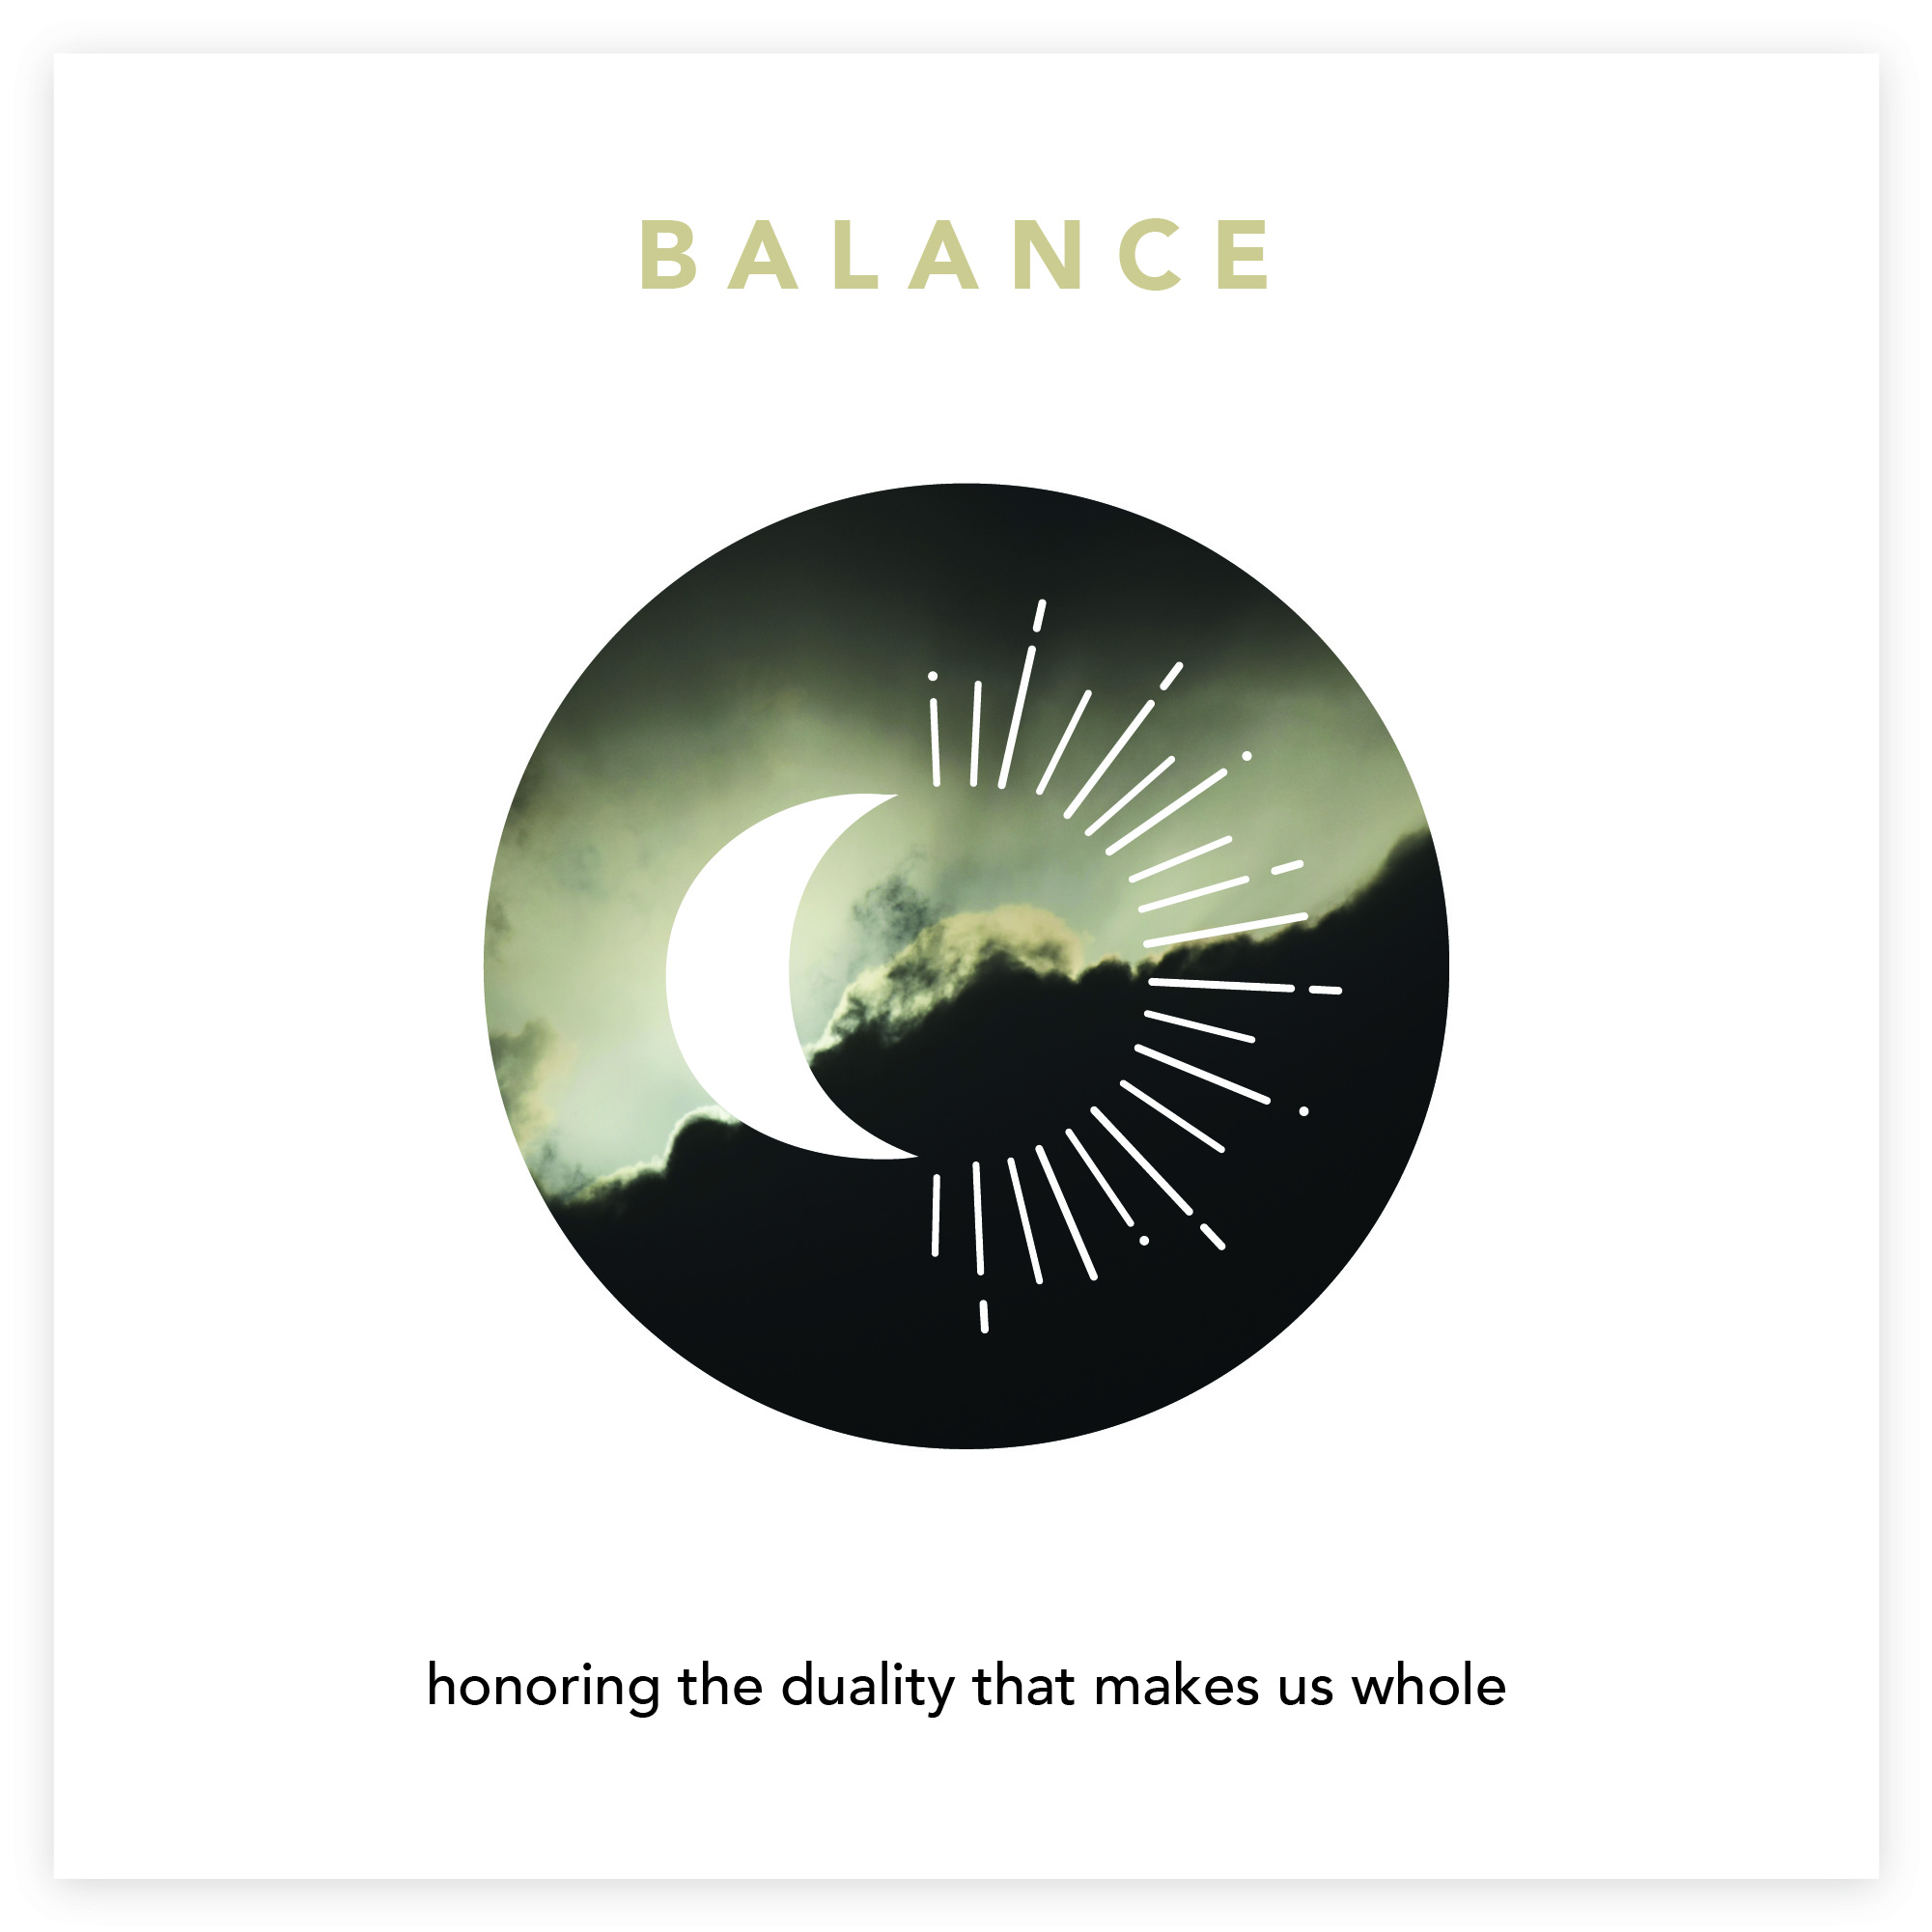 BALANCE - honoring the duality that makes us whole